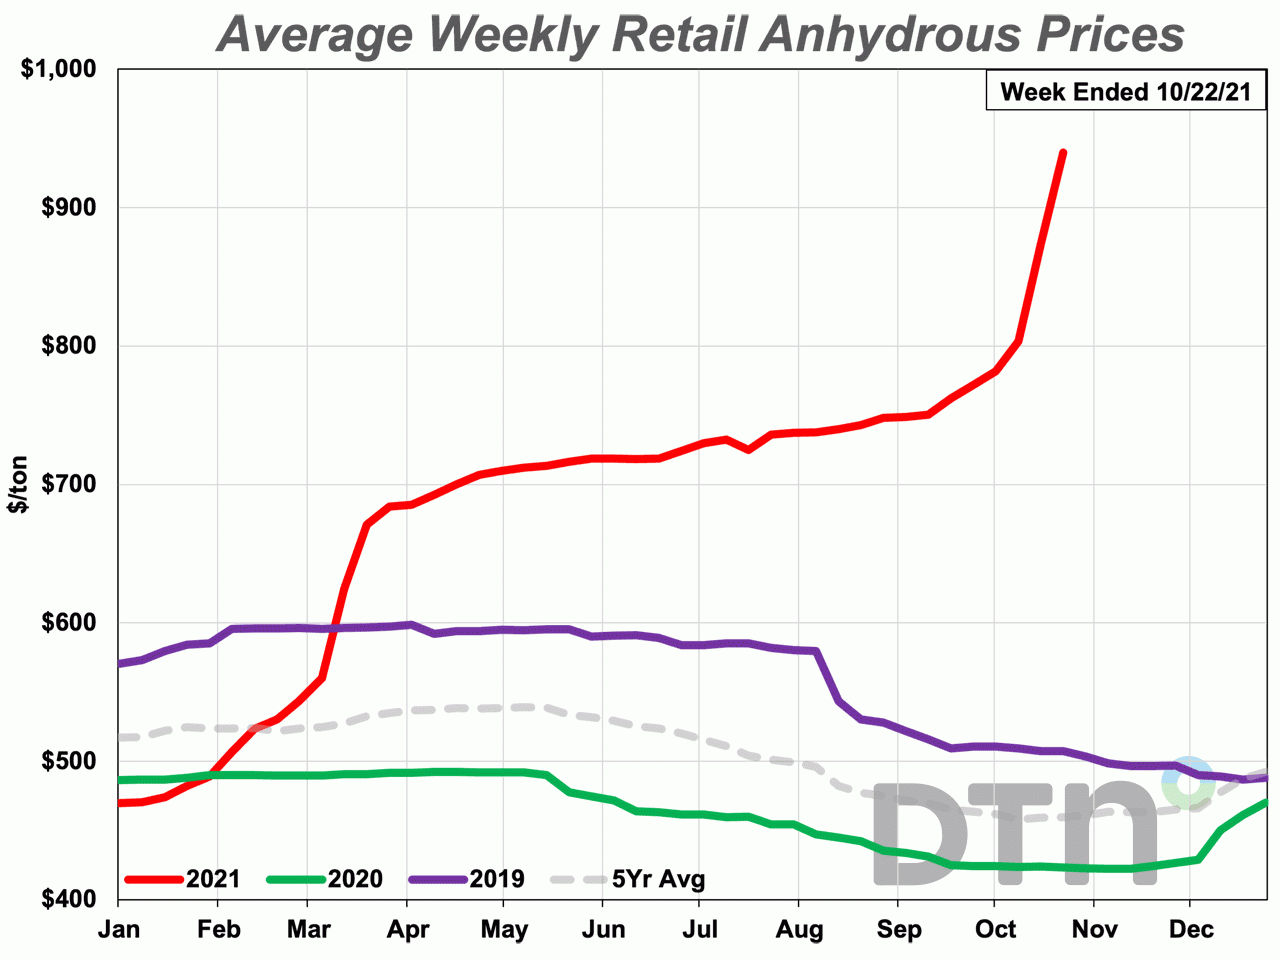 nuance Hovedløse At understrege Nitrogen Fertilizer Prices Lead Surge as Anhydrous Hits $940 Per Ton